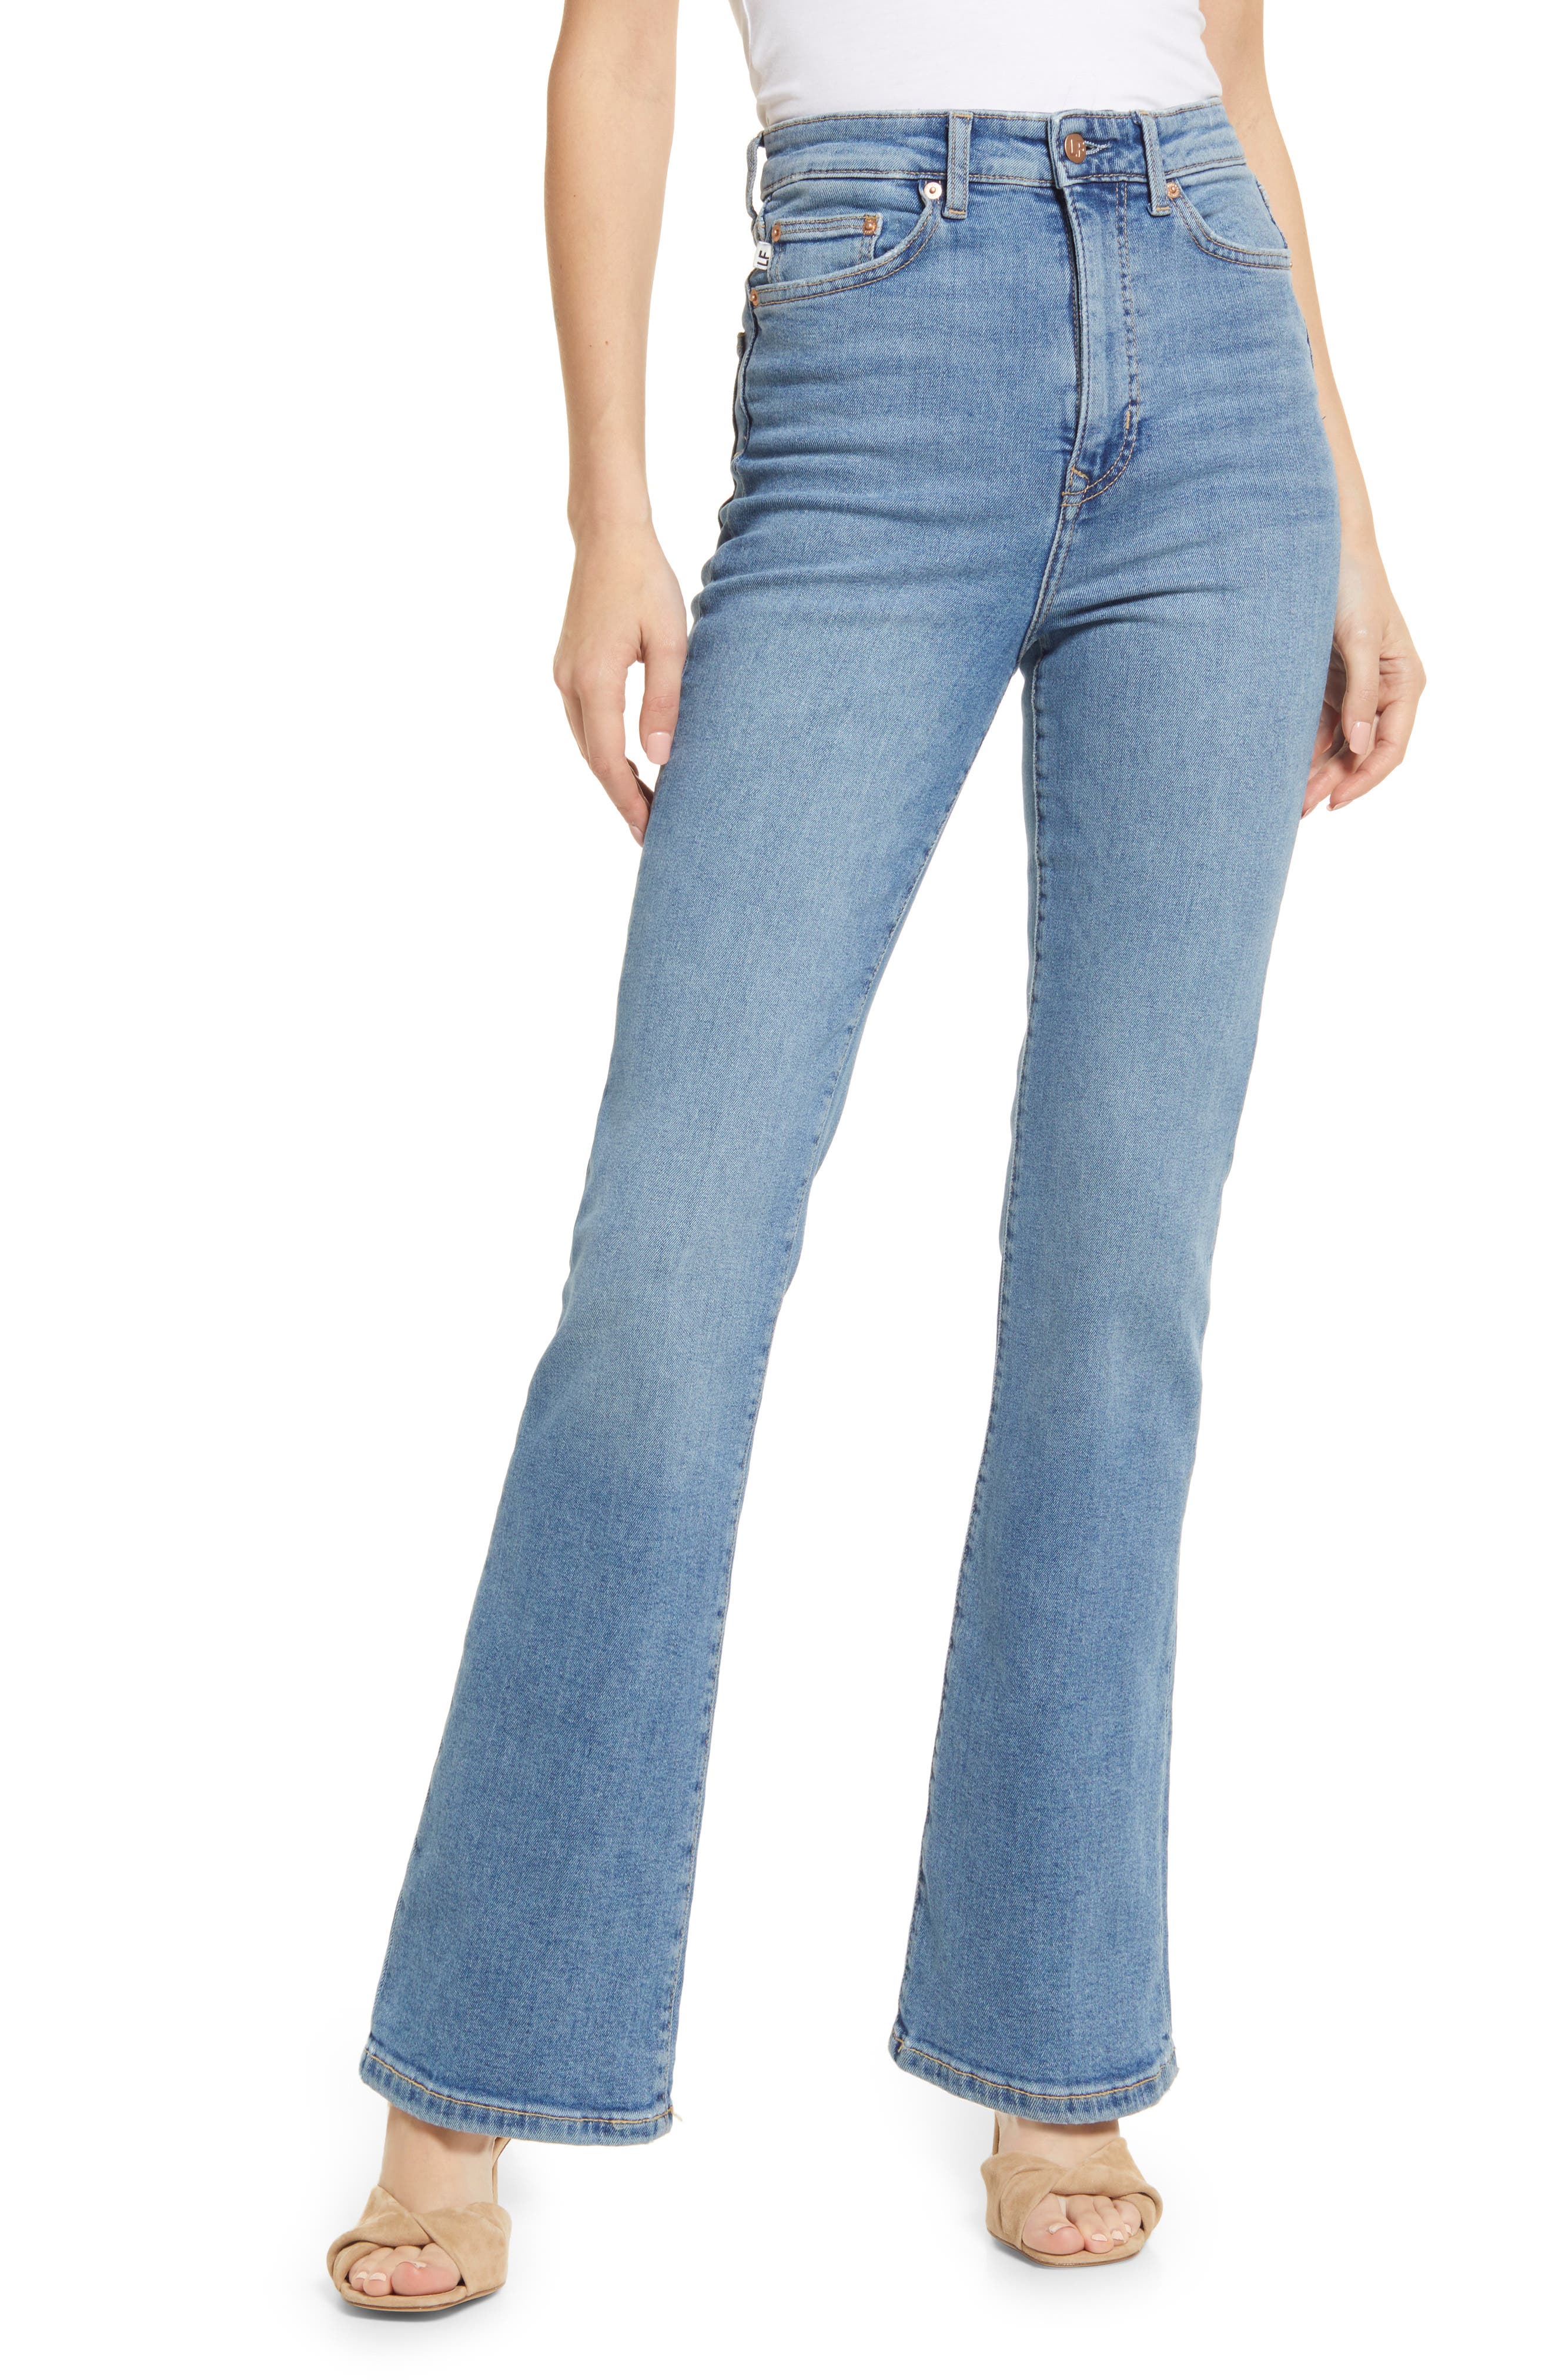 Lovers + Friends Greyson High Rise Slim Bootcut Jeans in Skyline